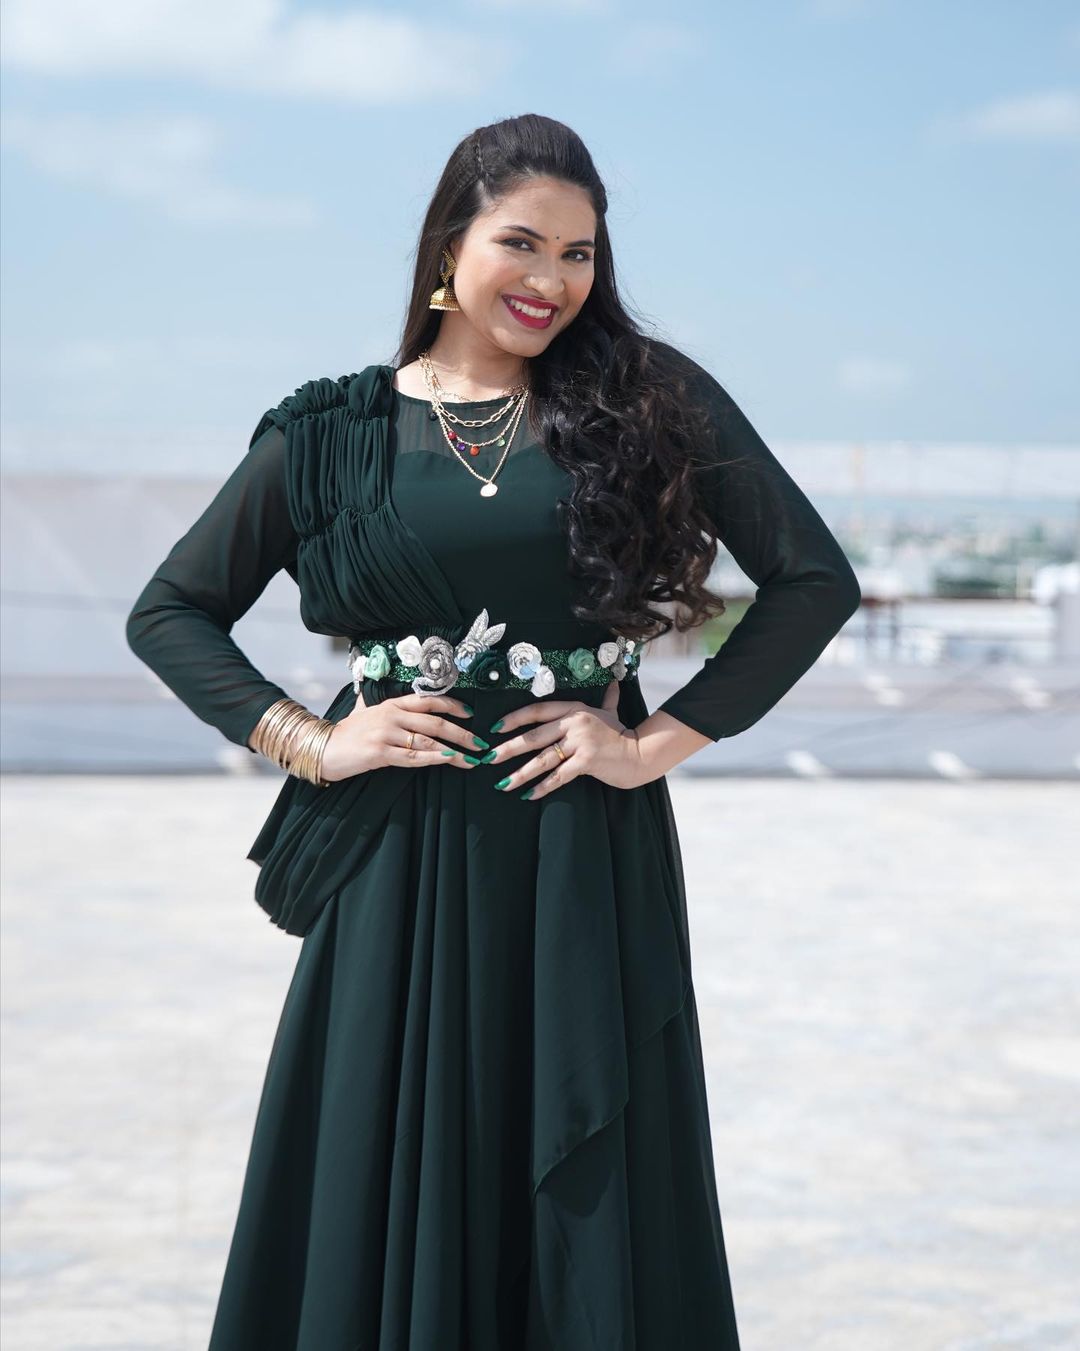 Actress meghana looking awesome in black dress-Actress Meghana, Actressmeghana, Meghana Photos,Spicy Hot Pics,Images,High Resolution WallPapers Download